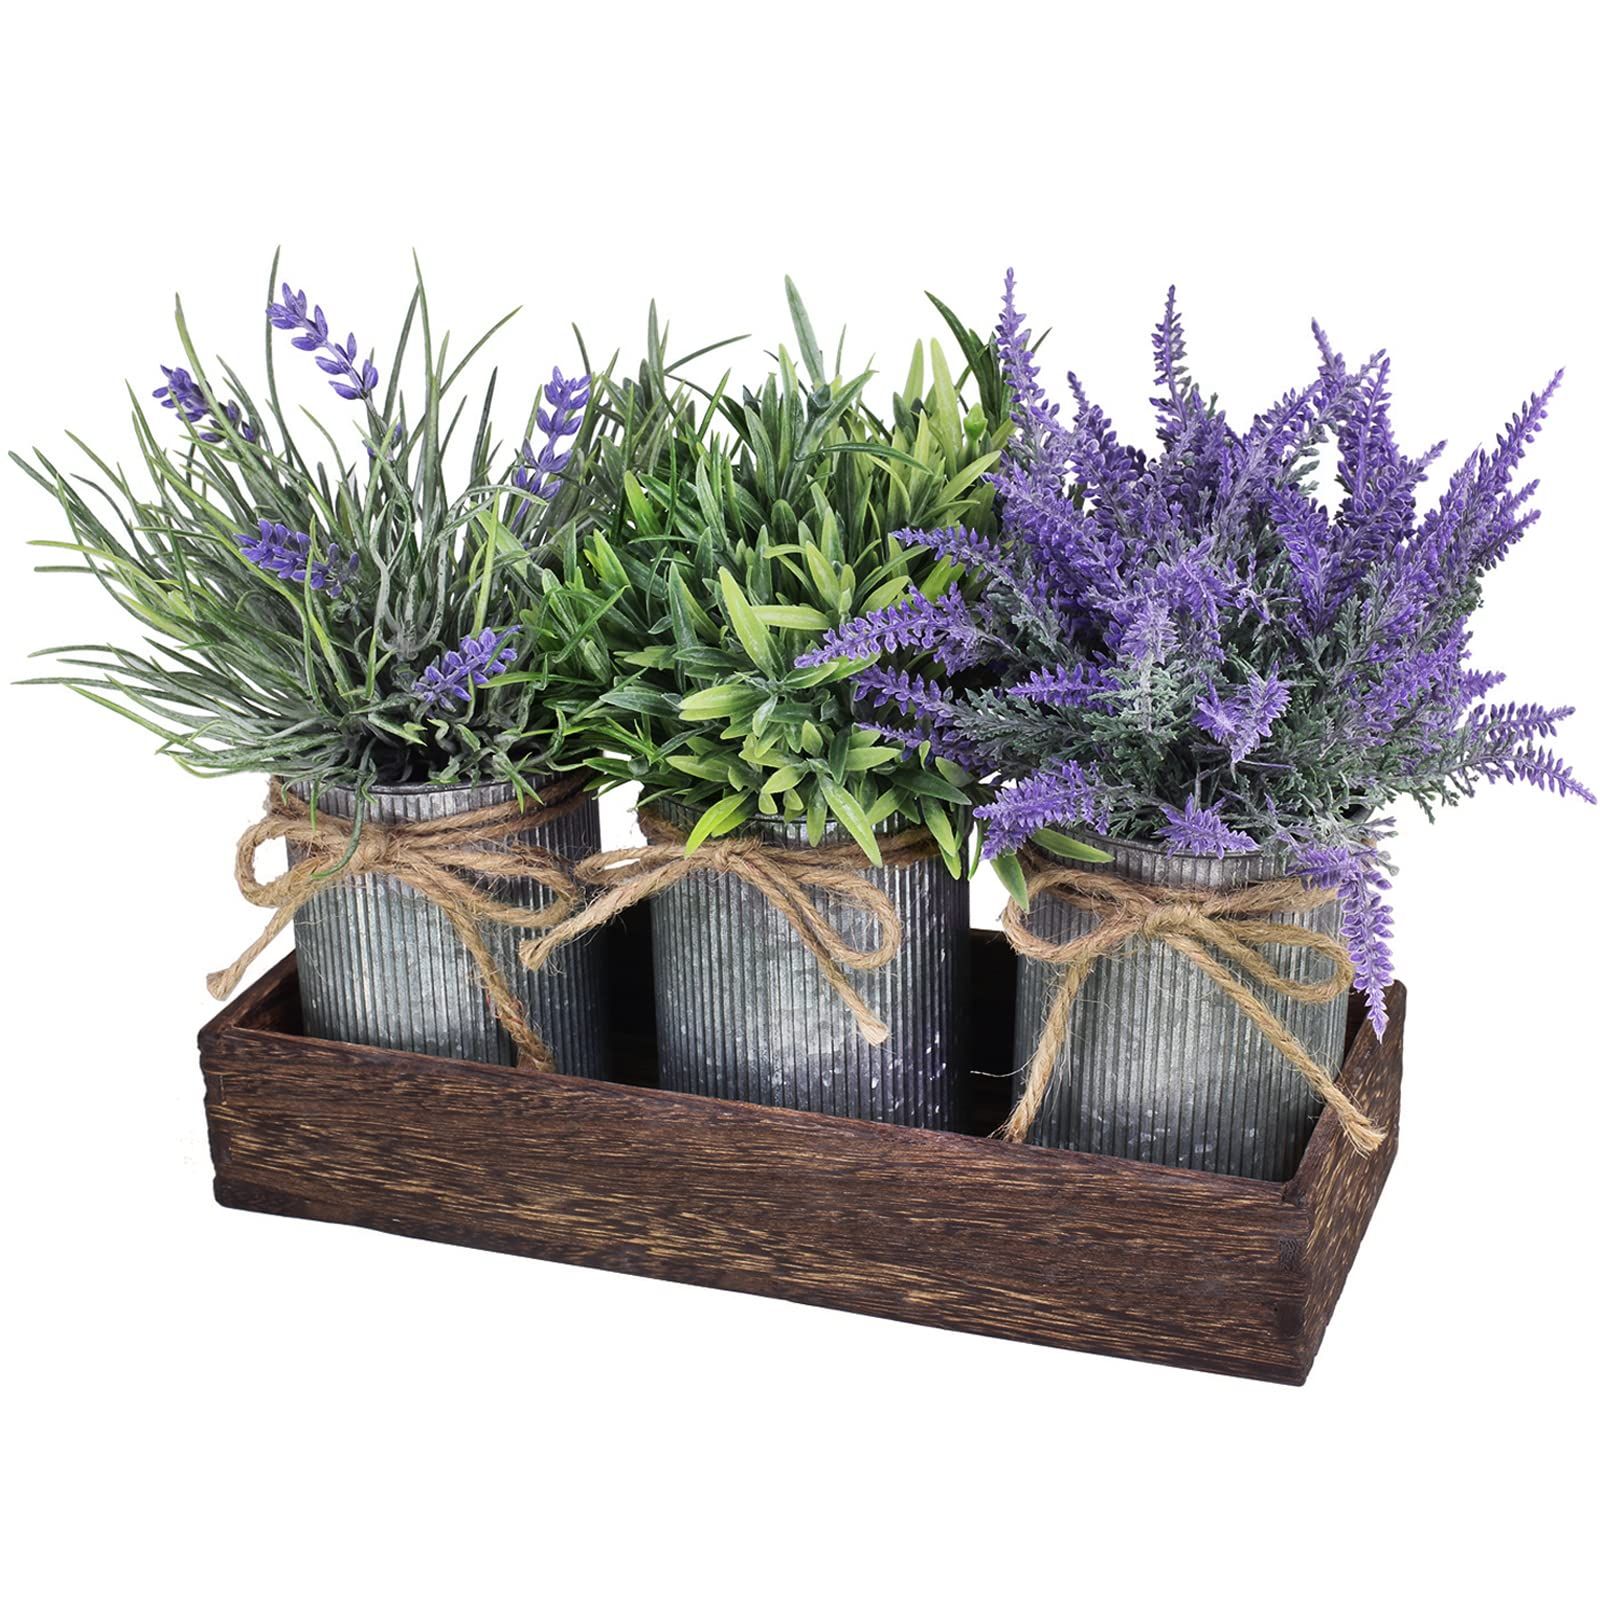 Set of 3 Small Potted Plants Arrangement Artificial Lavender and Grass Plants in Rustic Galvanize... | Amazon (US)